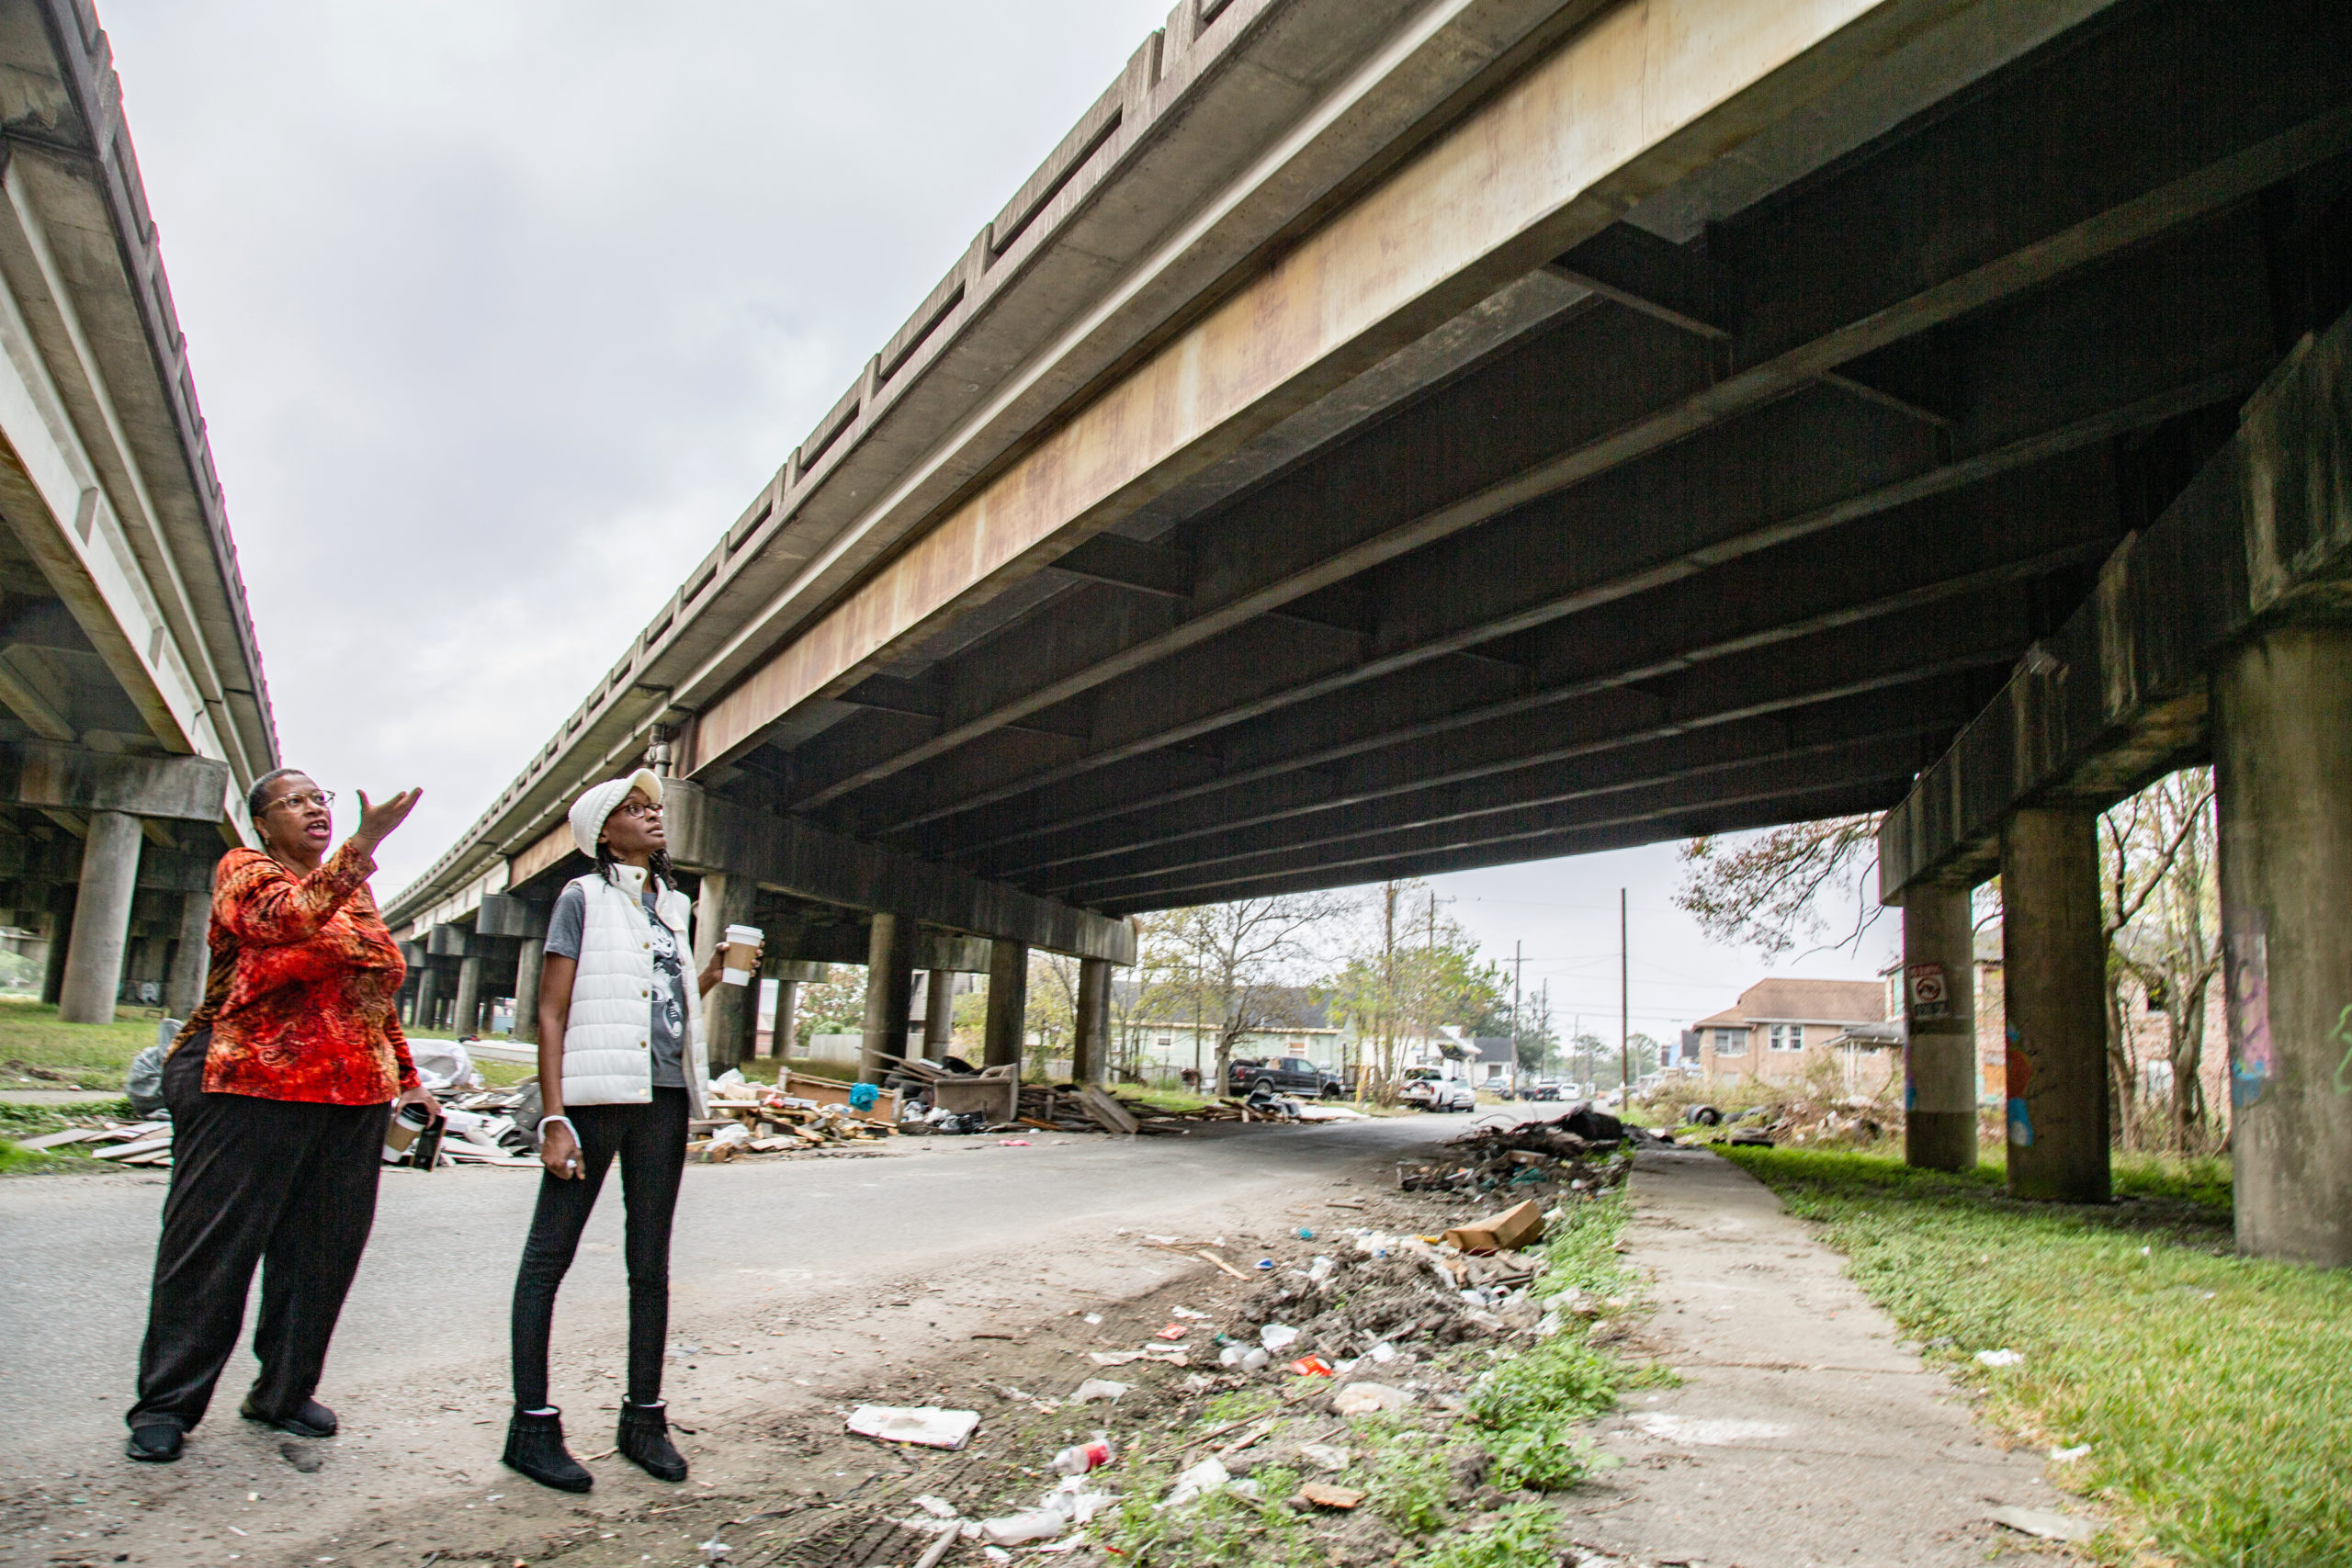 From left: Community leads Amy Stelly and Tamah Yisrael of the Claiborne Avenue Alliance stand at the highway I-10 overpass in Tamah’s neighborhood in the 7th Ward.